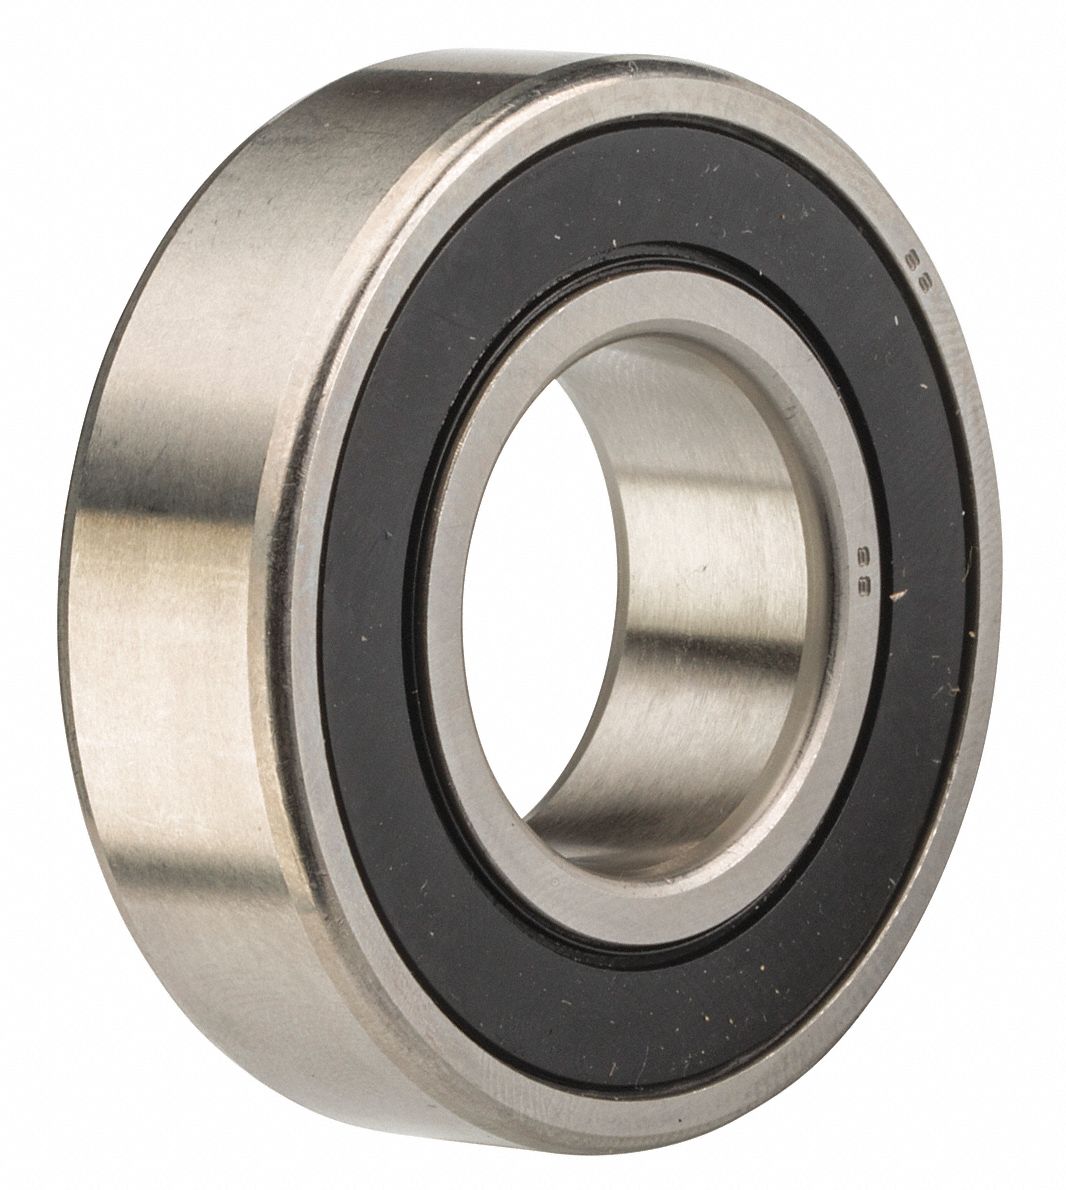 Radial Ball Bearing: 25 mm Bore Dia., 52 mm Outside Dia., 15 mm Wd, Double Sealed